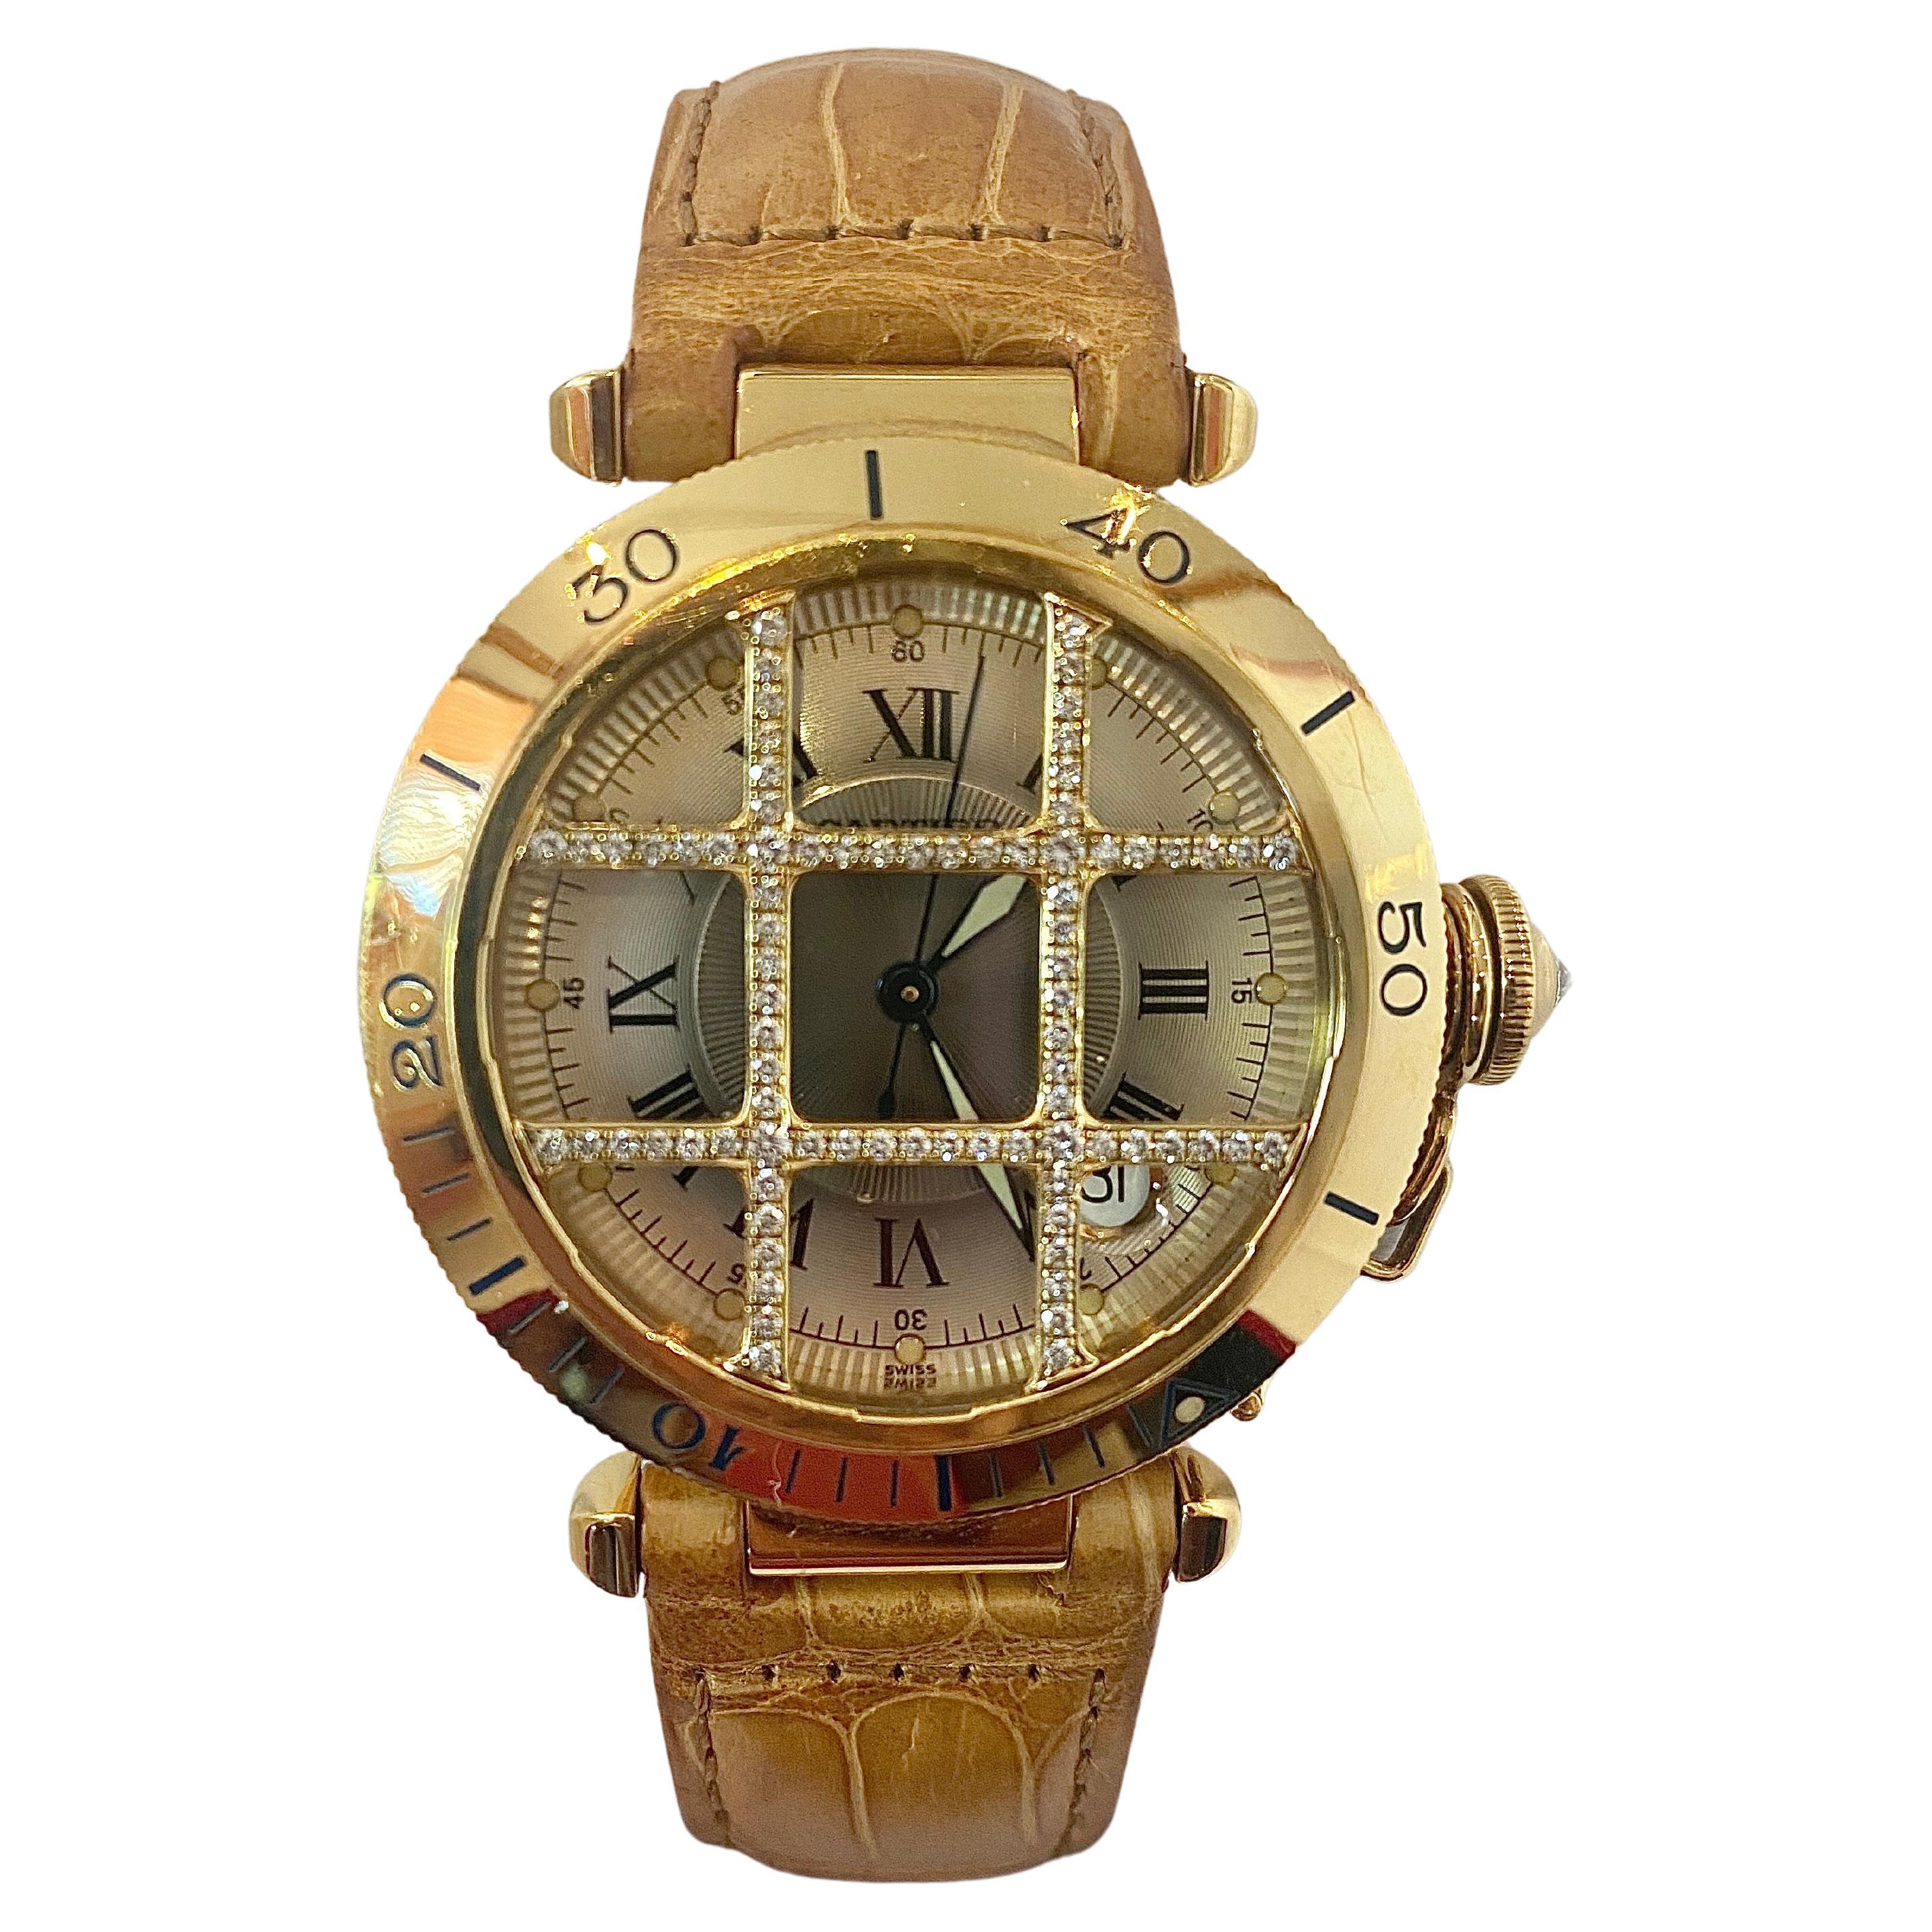 Cartier Pasha Men's Watch with Diamond Cage and Brown Leather Strap